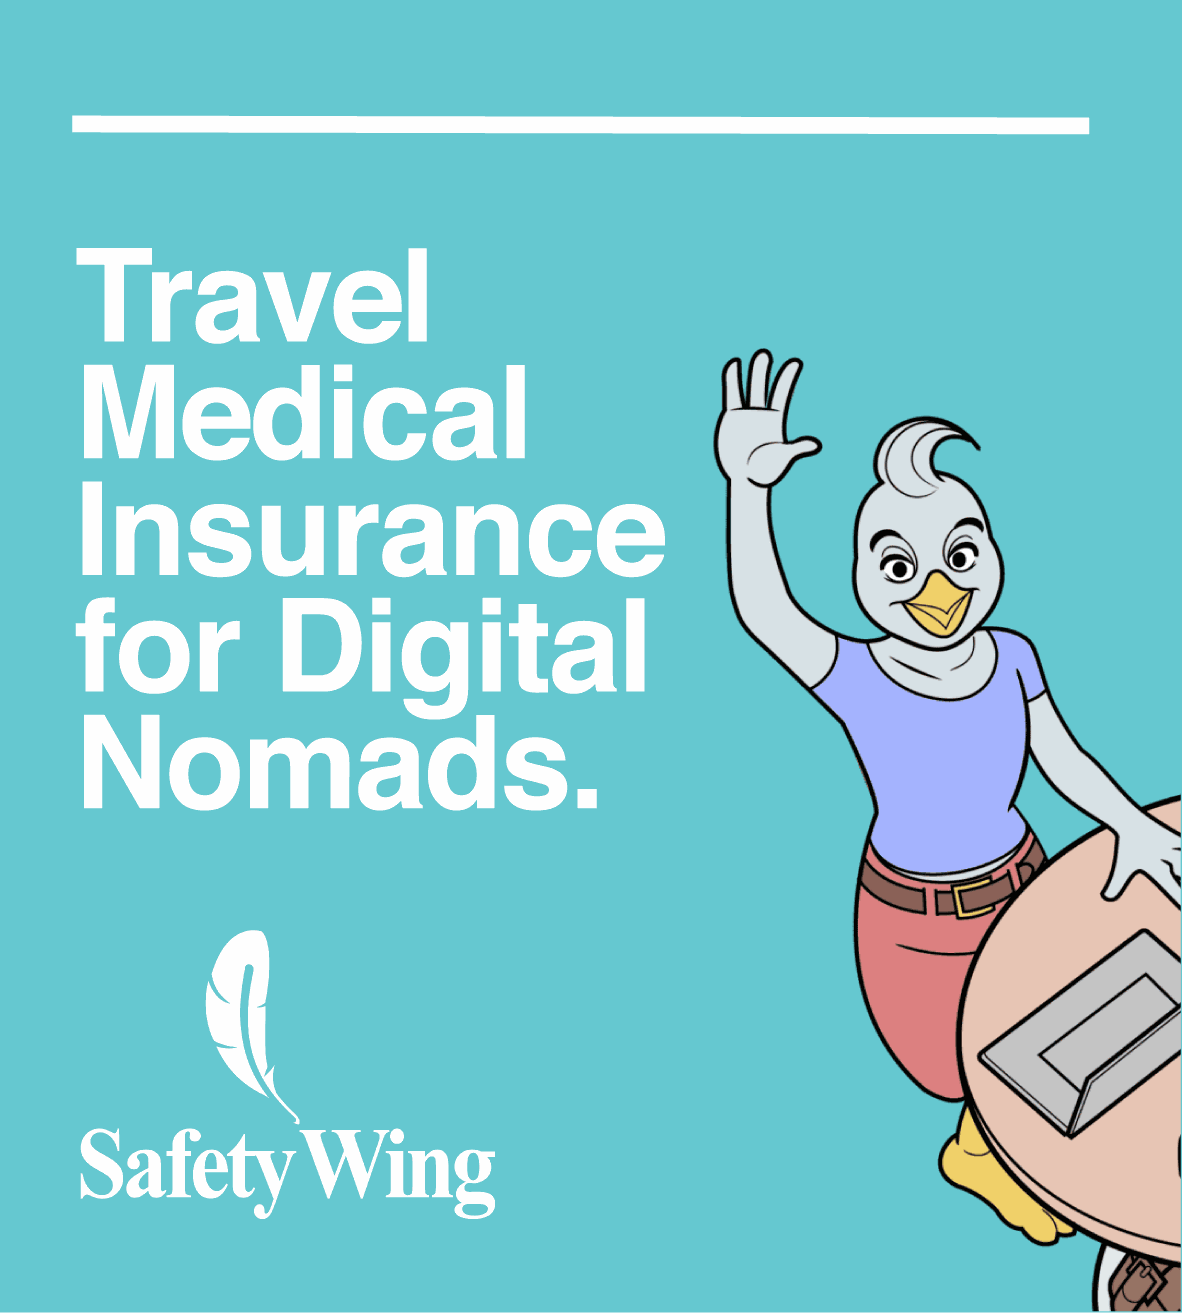 This Travel Medical Insurance Provides Worldwide Coverage for Nomads - Alvinology